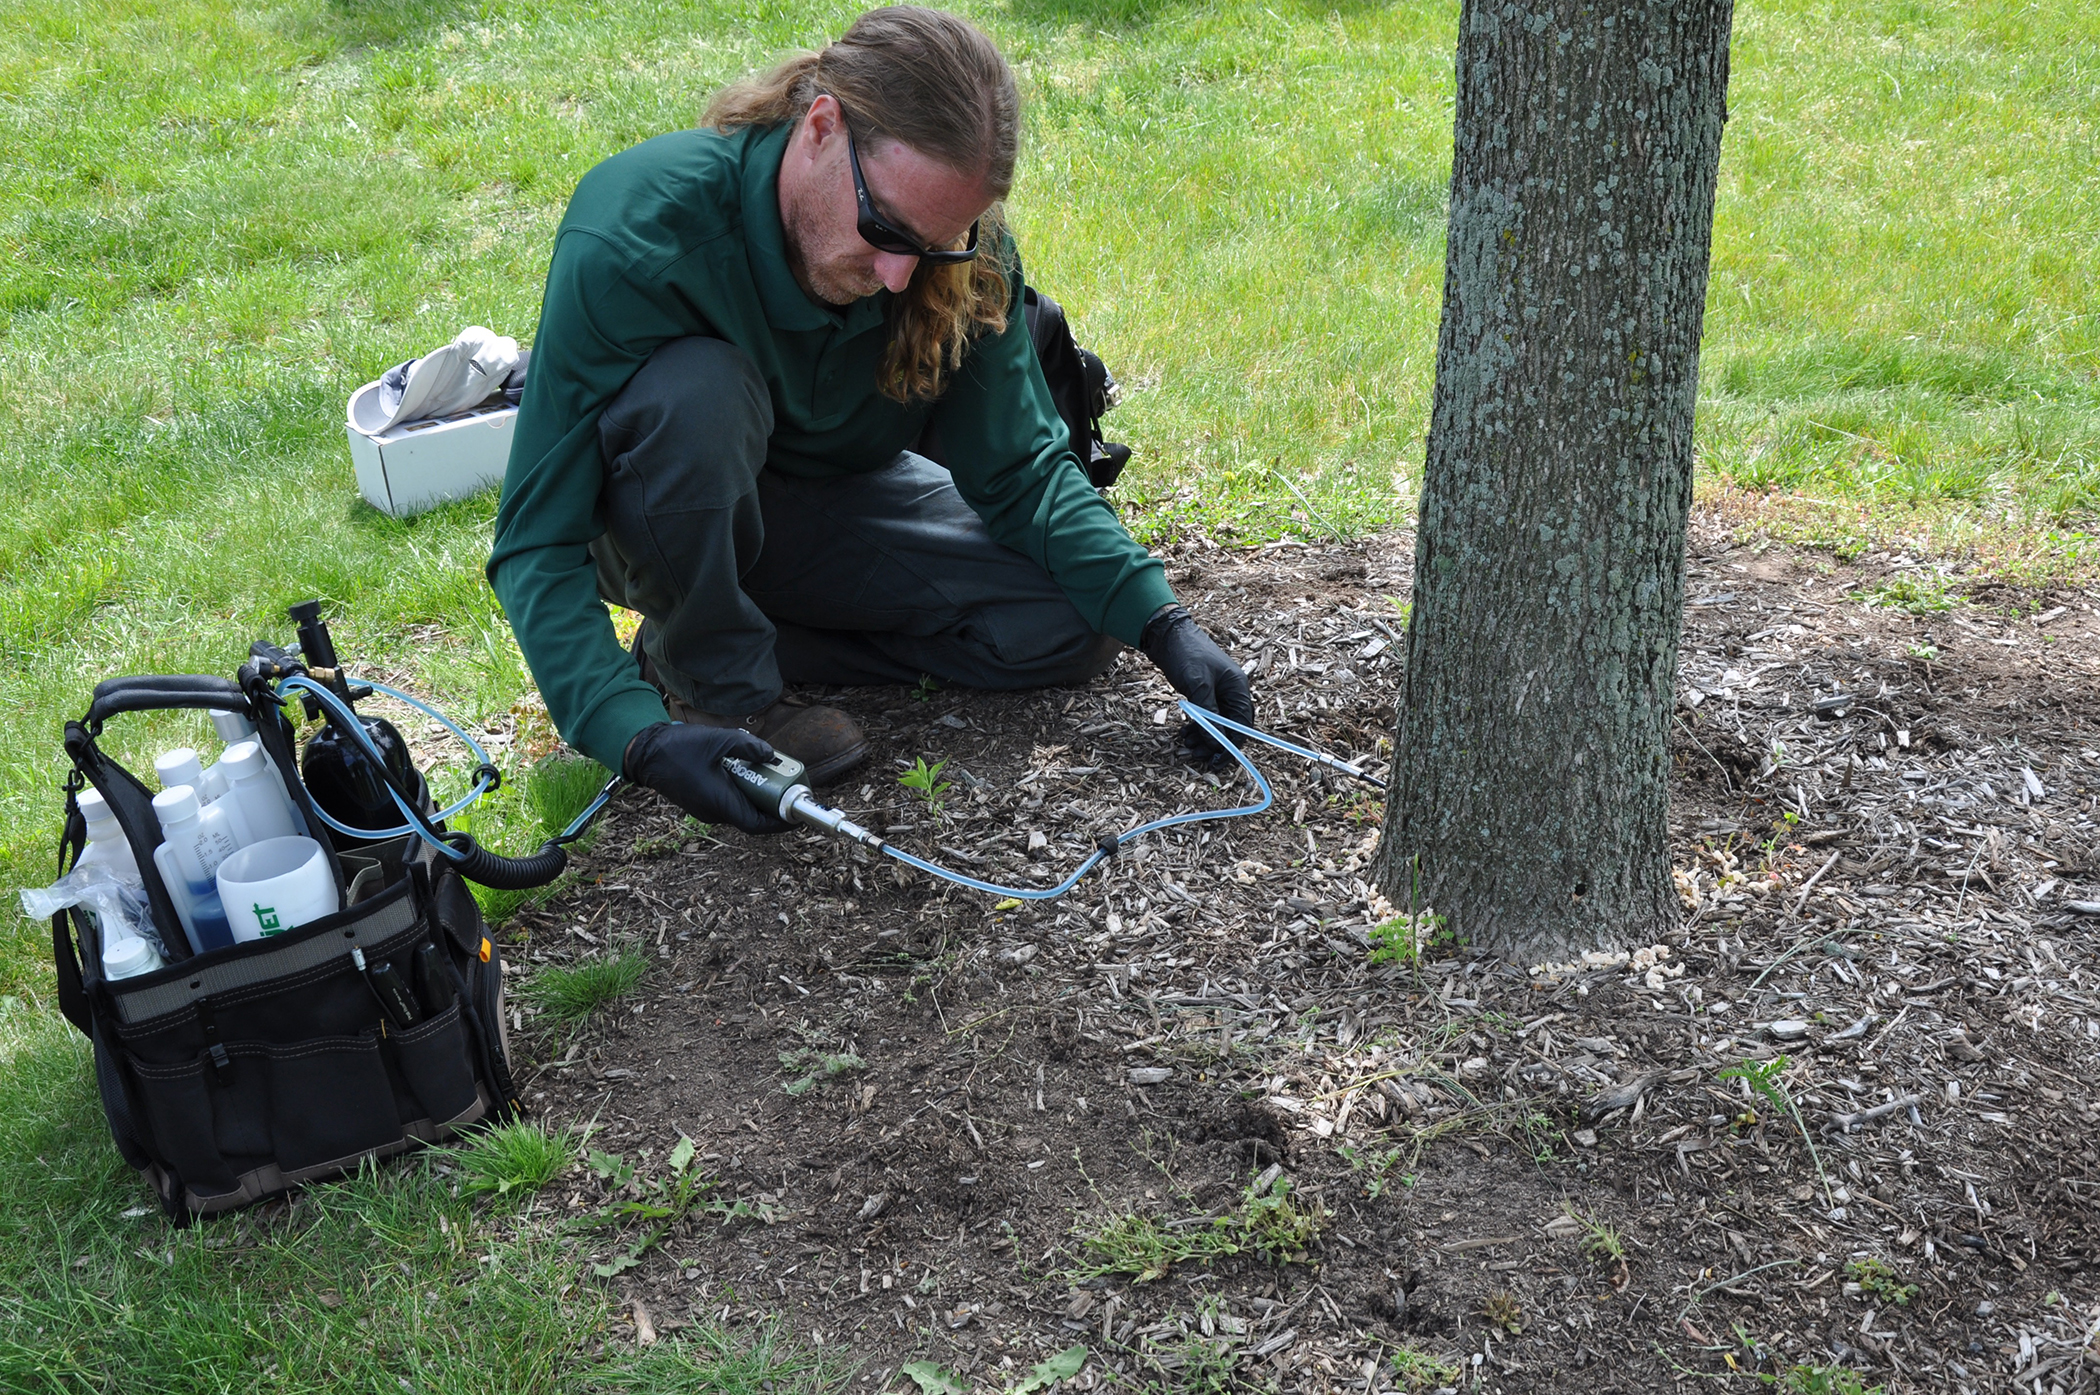 Almstead technician, Jim Hurley, injects an ash tree with Arborjet insecticide to protect it from EAB